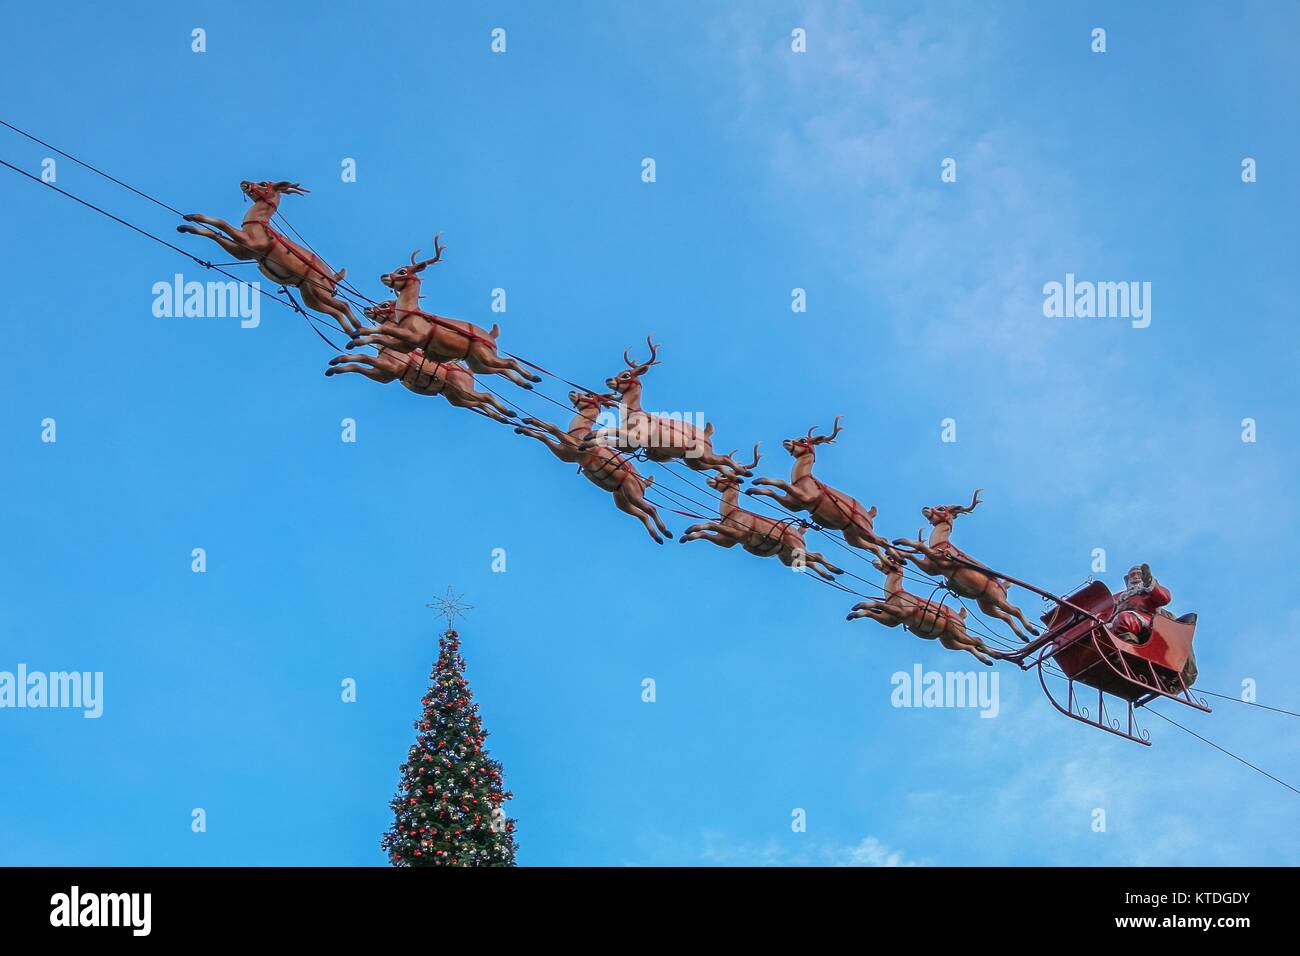 LOS ANGELES, CALIFORNIA, USA, NOVEMBER 26, 2006 - A figure of Santa Claus in his sleigh pulled by his reindeer adorns the sky of The Grove Mall. Stock Photo